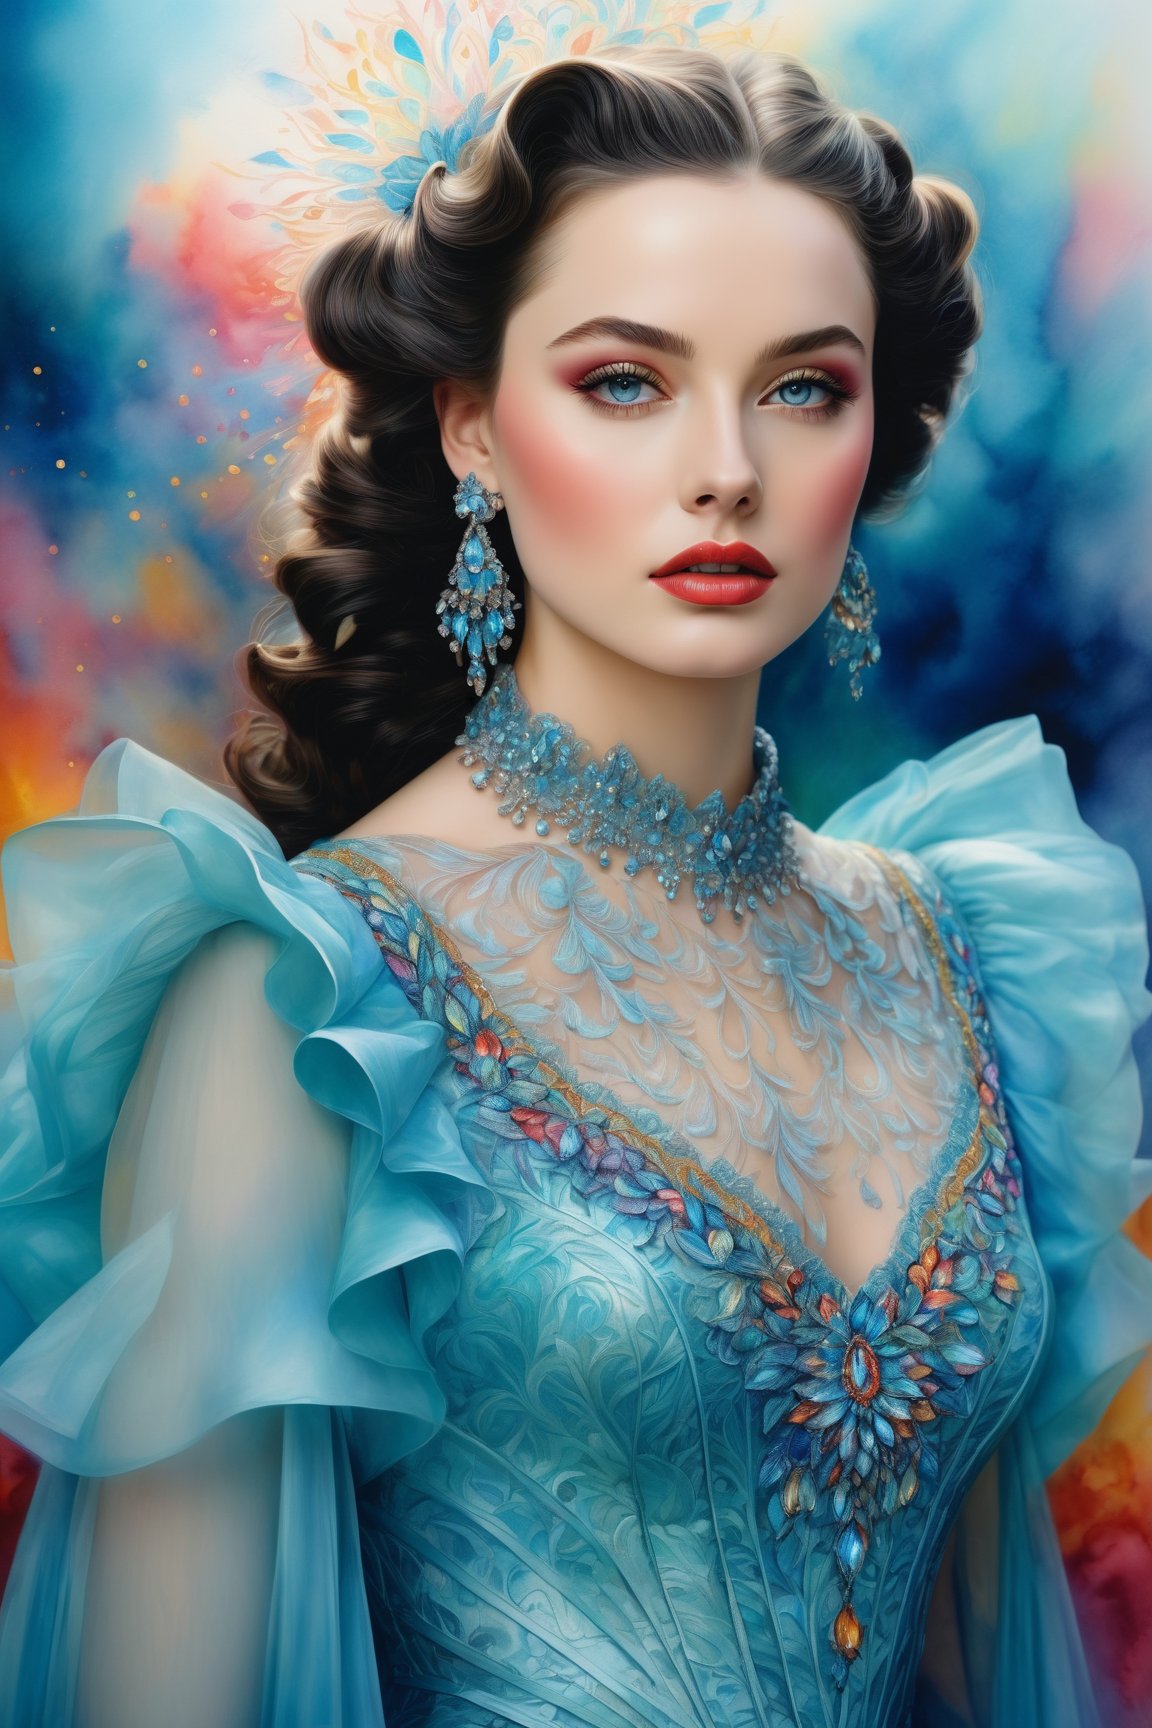 (best quality, 8K, highres, masterpiece), ultra-detailed, (watercolor, colored pencil drawing), portraying a beautiful girl reminiscent of Vivien Leigh. The artwork bursts with a vibrant array of colors including black, light blue, and other vivid tones. The portrait features a shiny aura, intricate motifs, and organic tracery, creating a hyper-realistic and highly detailed masterpiece. The composition is perfect, with shining particles adding to the realism. The frilly blouse and light makeup are depicted with an explosion of colors, making this artwork a mesmerizing celebration of vivid hues and artistic brilliance.